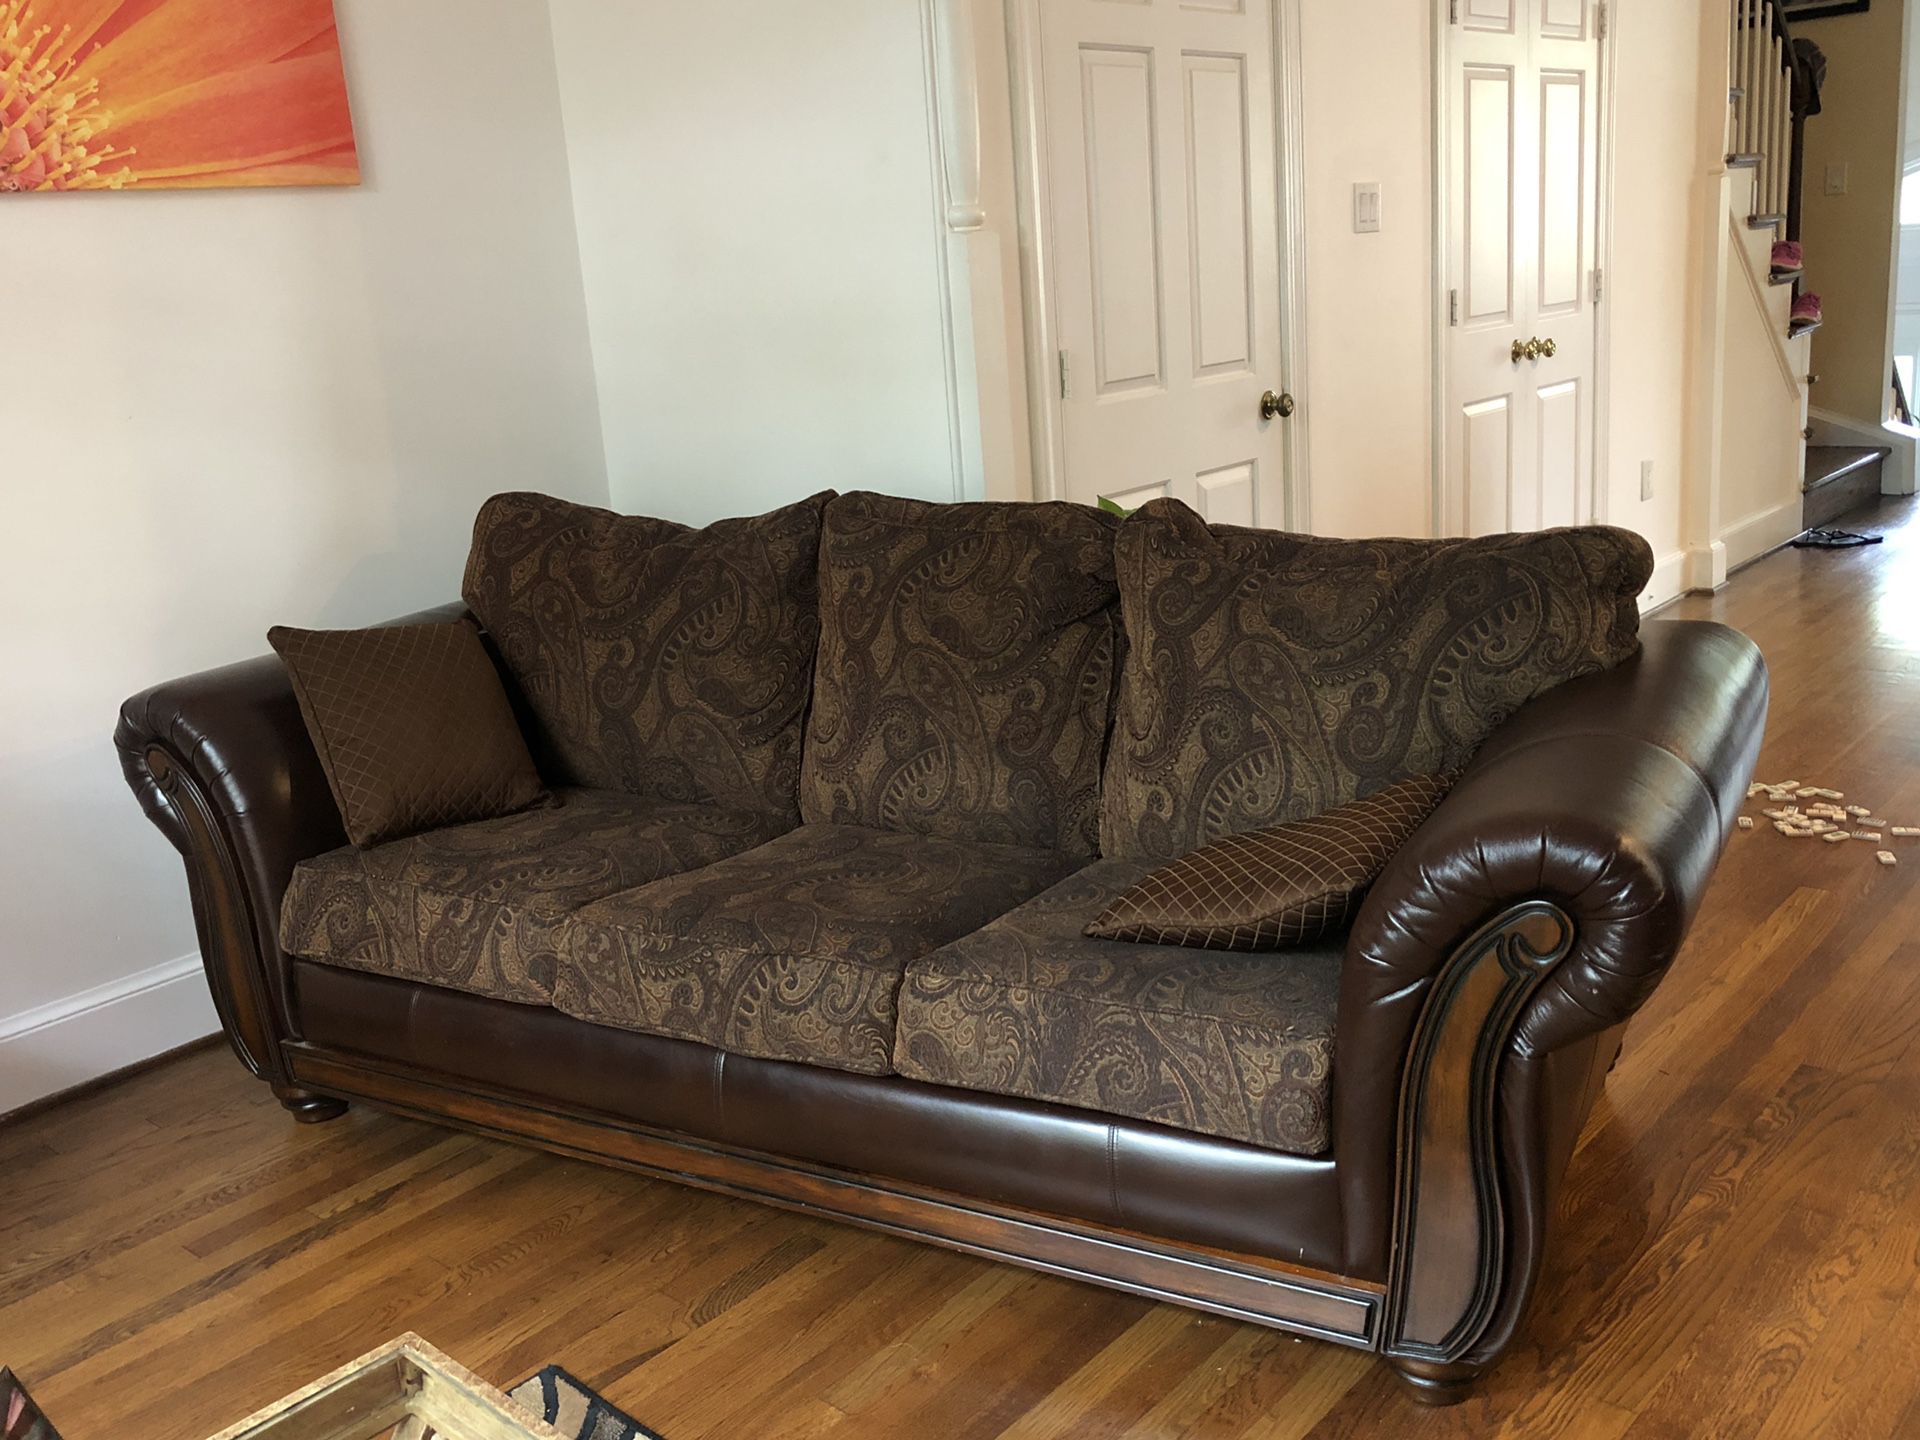 Queen Sleeper Sofa and Accent Chair with pillows